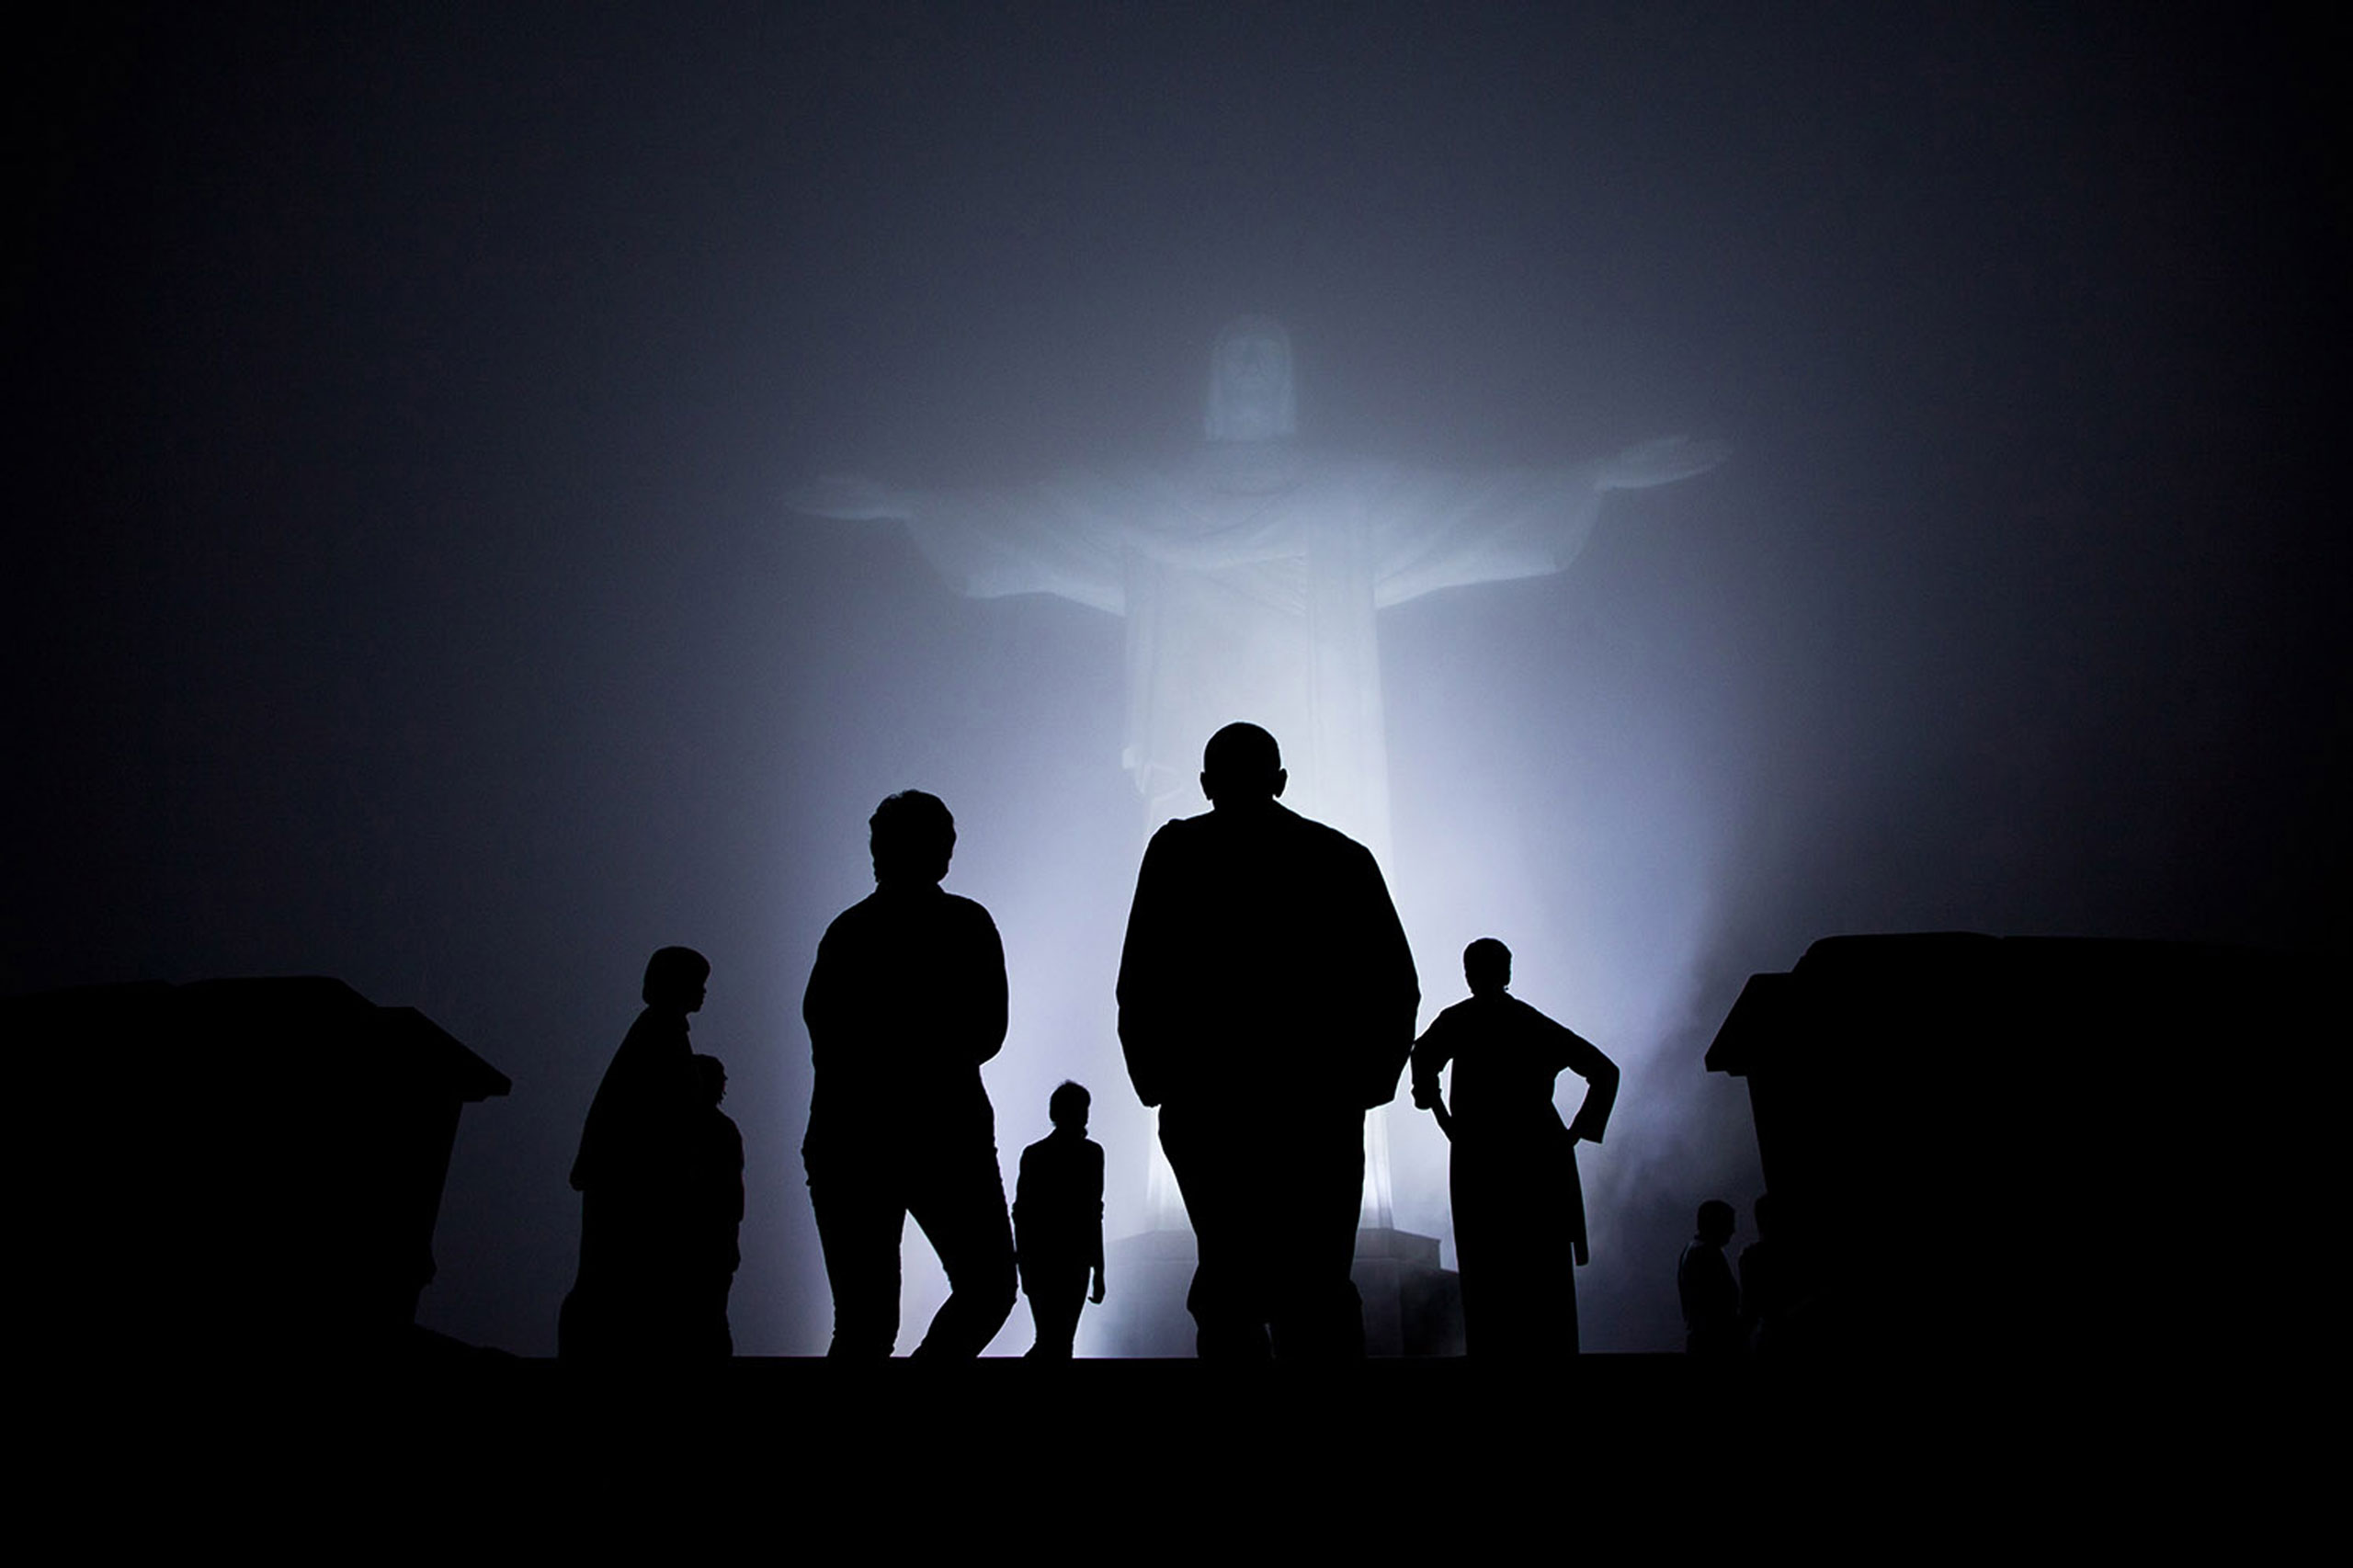 The Obama family was scheduled to tour the Christ the Redeemer statue in Rio de Janeiro, Brazil, before dinner one night March 20, 2011. But when heavy fog rolled in, they decided to cancel the visit. After dinner though, the fog had dissipated somewhat so they decided to make the drive up the mountain after all. It was quite clear when they arrived and then the fog started to roll back in. I managed to capture this silhouette as they viewed the statute one last time just before departure.